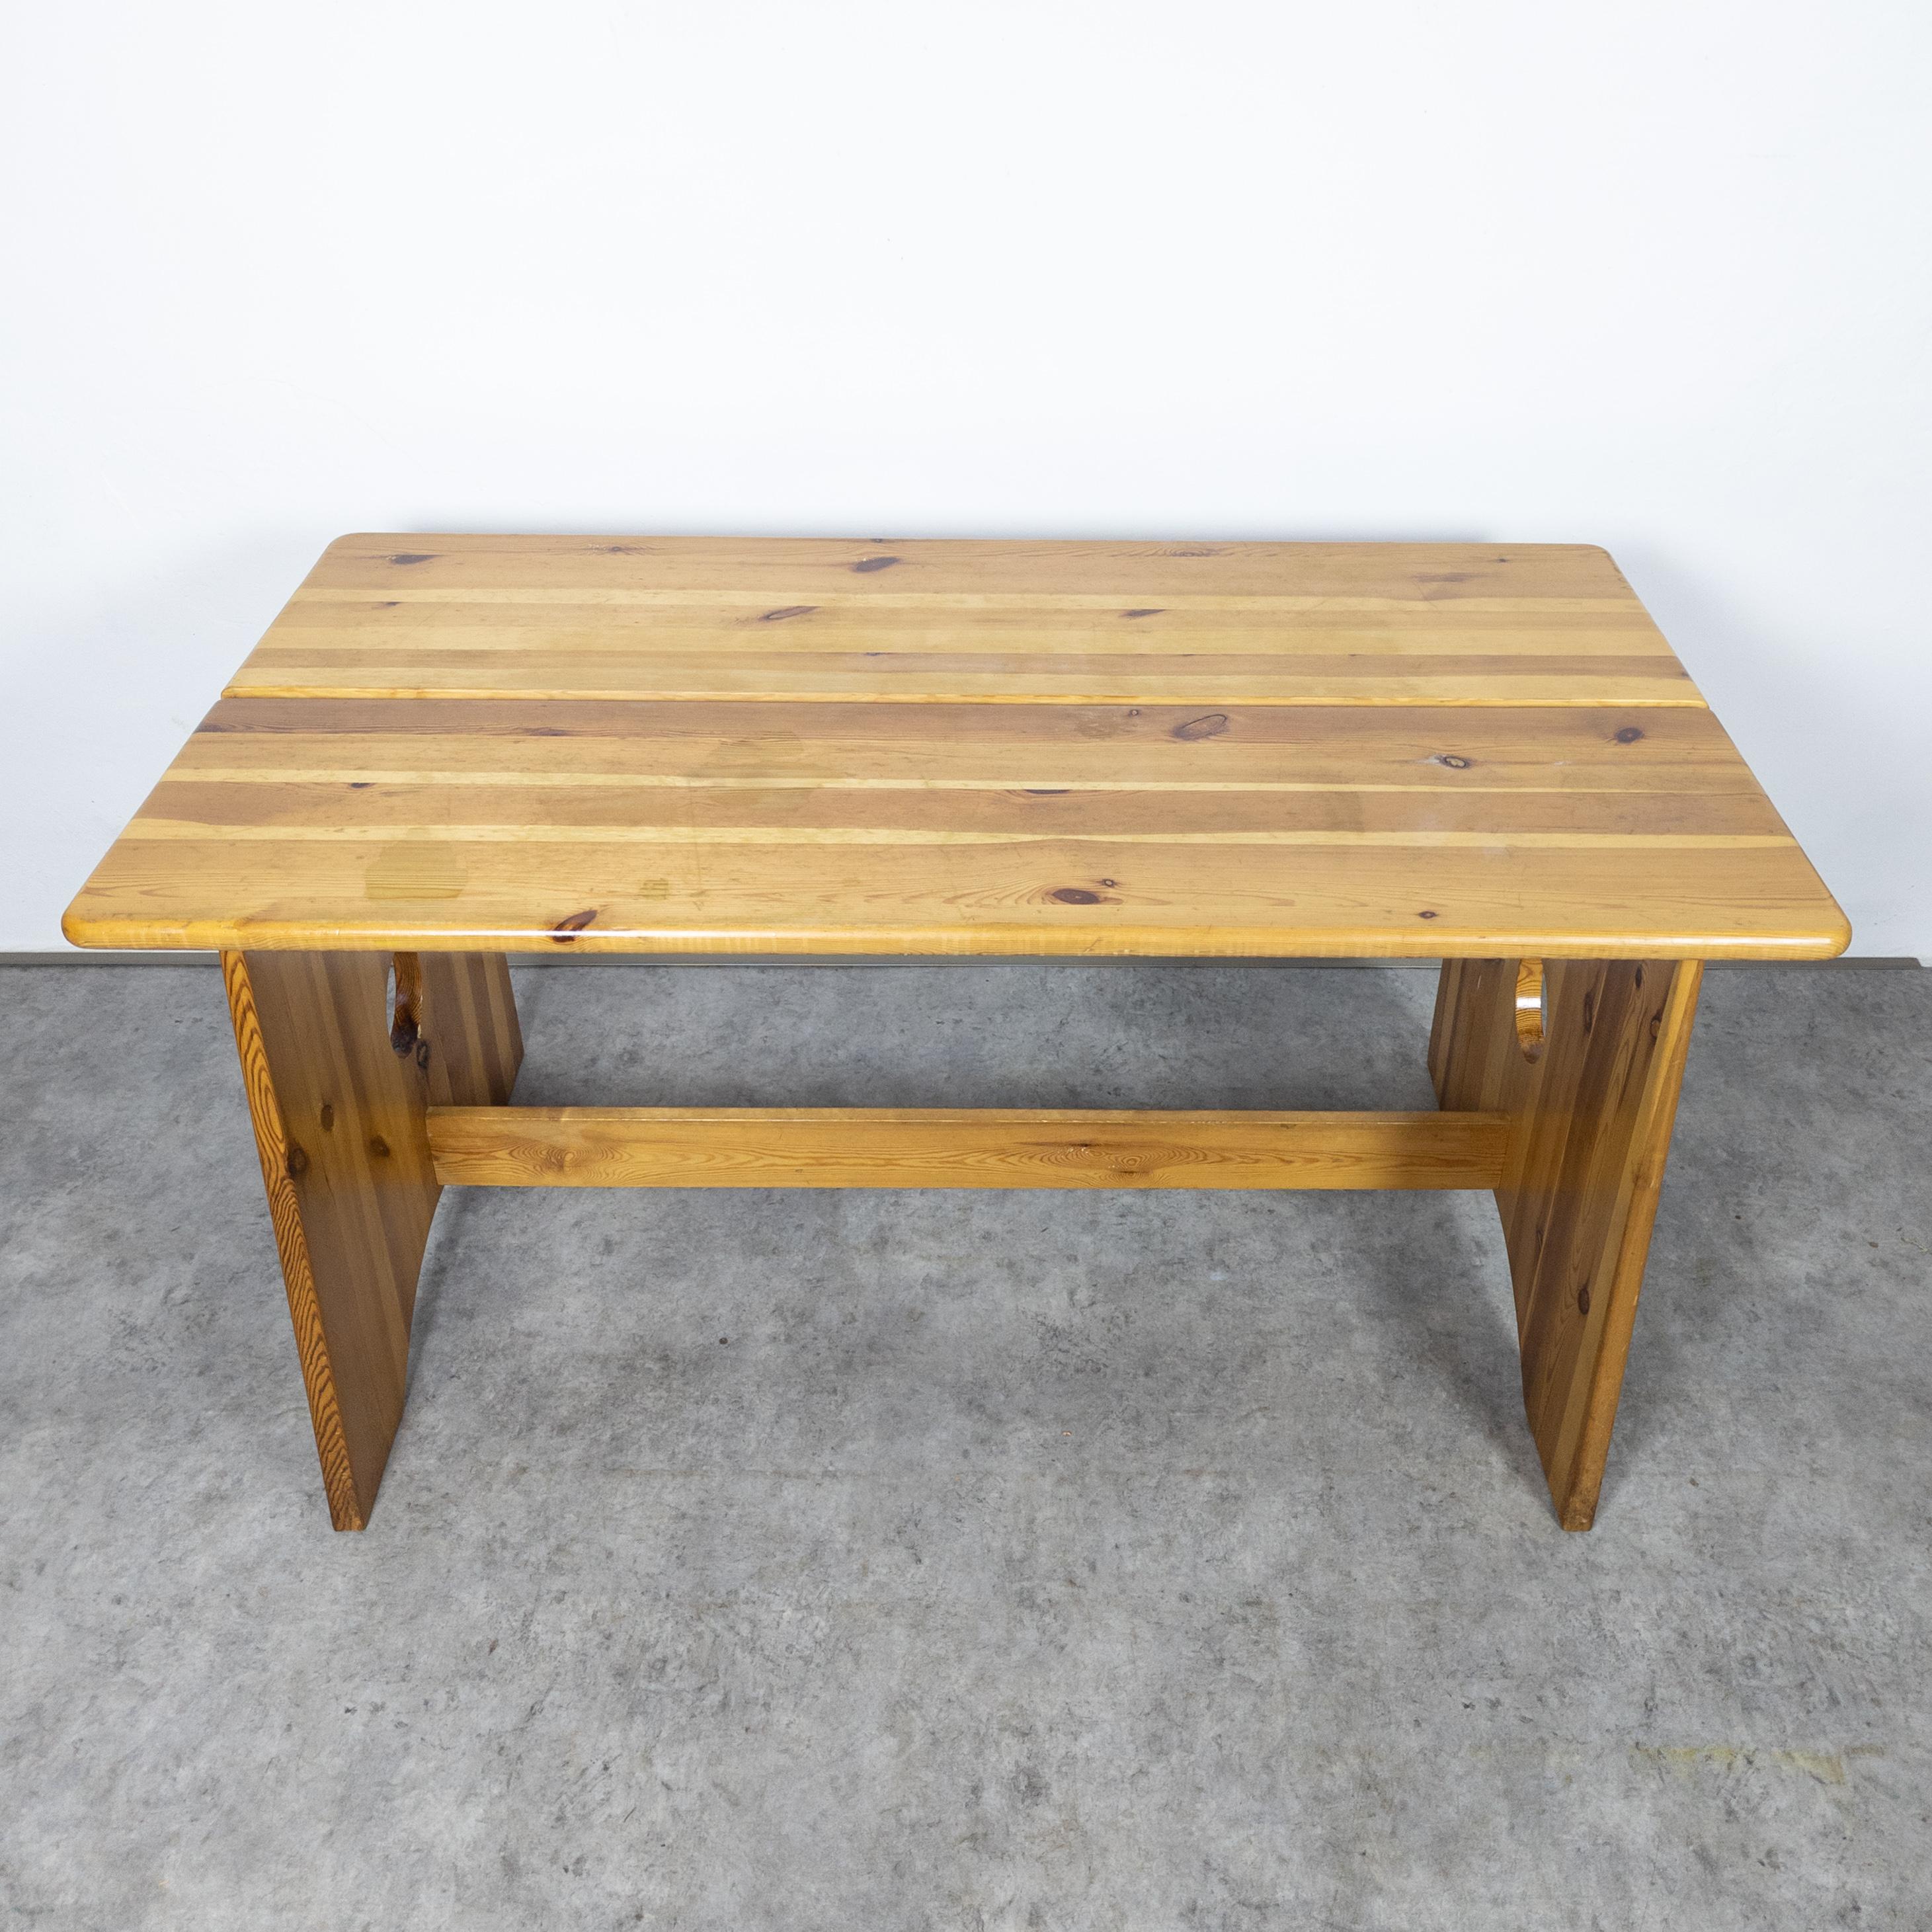 Sculptural Dining Set in Pine by Gilbert Marklund for Furusnickarn AB, 1970s For Sale 13